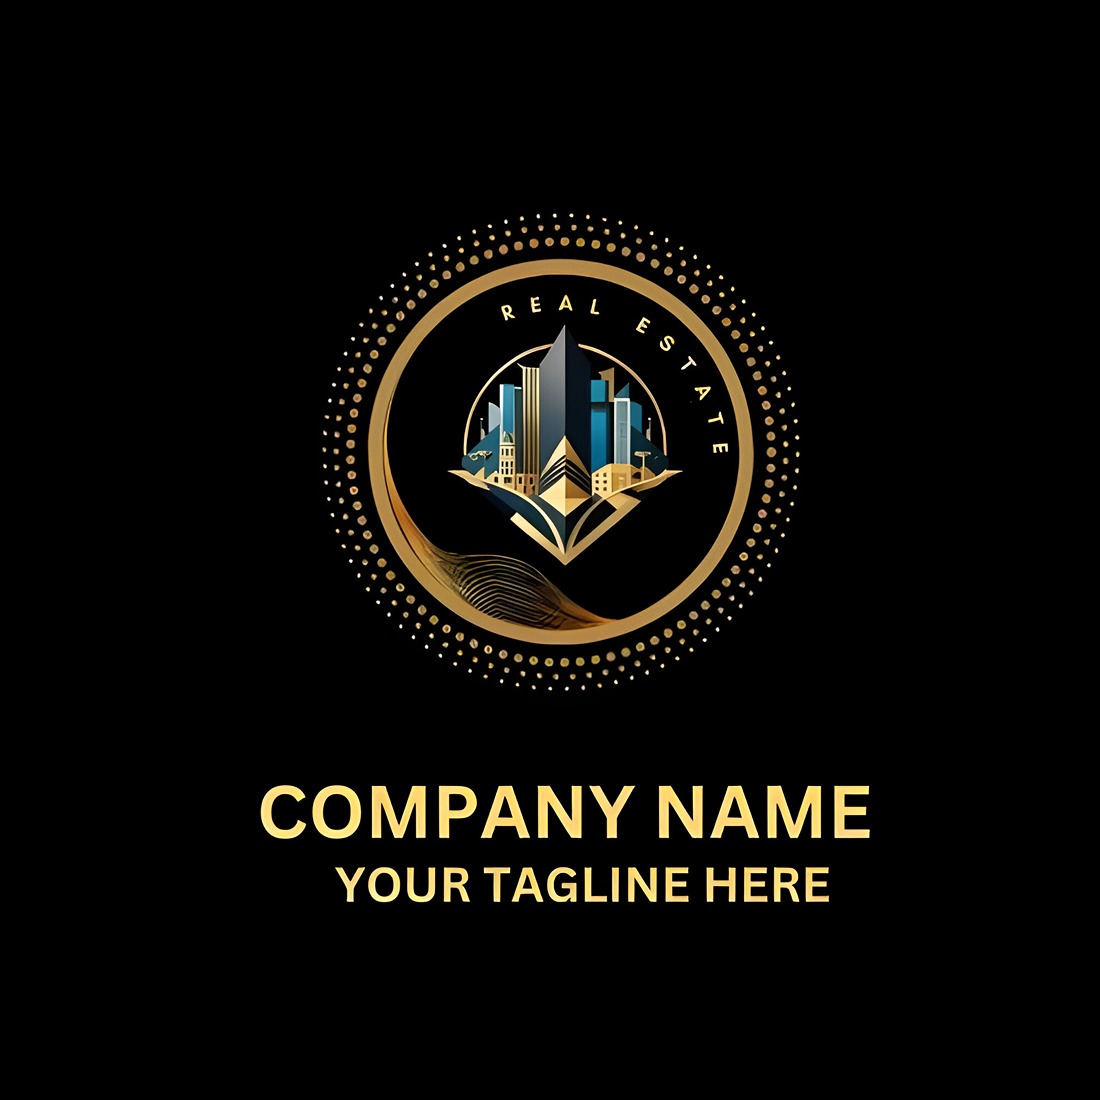 Real Estate - Luxury Logo Design Template, #realestate #logo #real #estate #realestateagent #realestateinvesting #realestatelife #luxuryrealestate #realestateteam #realestatephotographer #realestatedevelopment #realestatestyle #realestatelifestyle #realestateinnigeria #realestatenz #realestatestats #realestatepanama #realestatedevelopers #realestatepodcast #realestateagentsofinstagram #realestatevideography #realestatedeals #realestatephilippines  cover image.